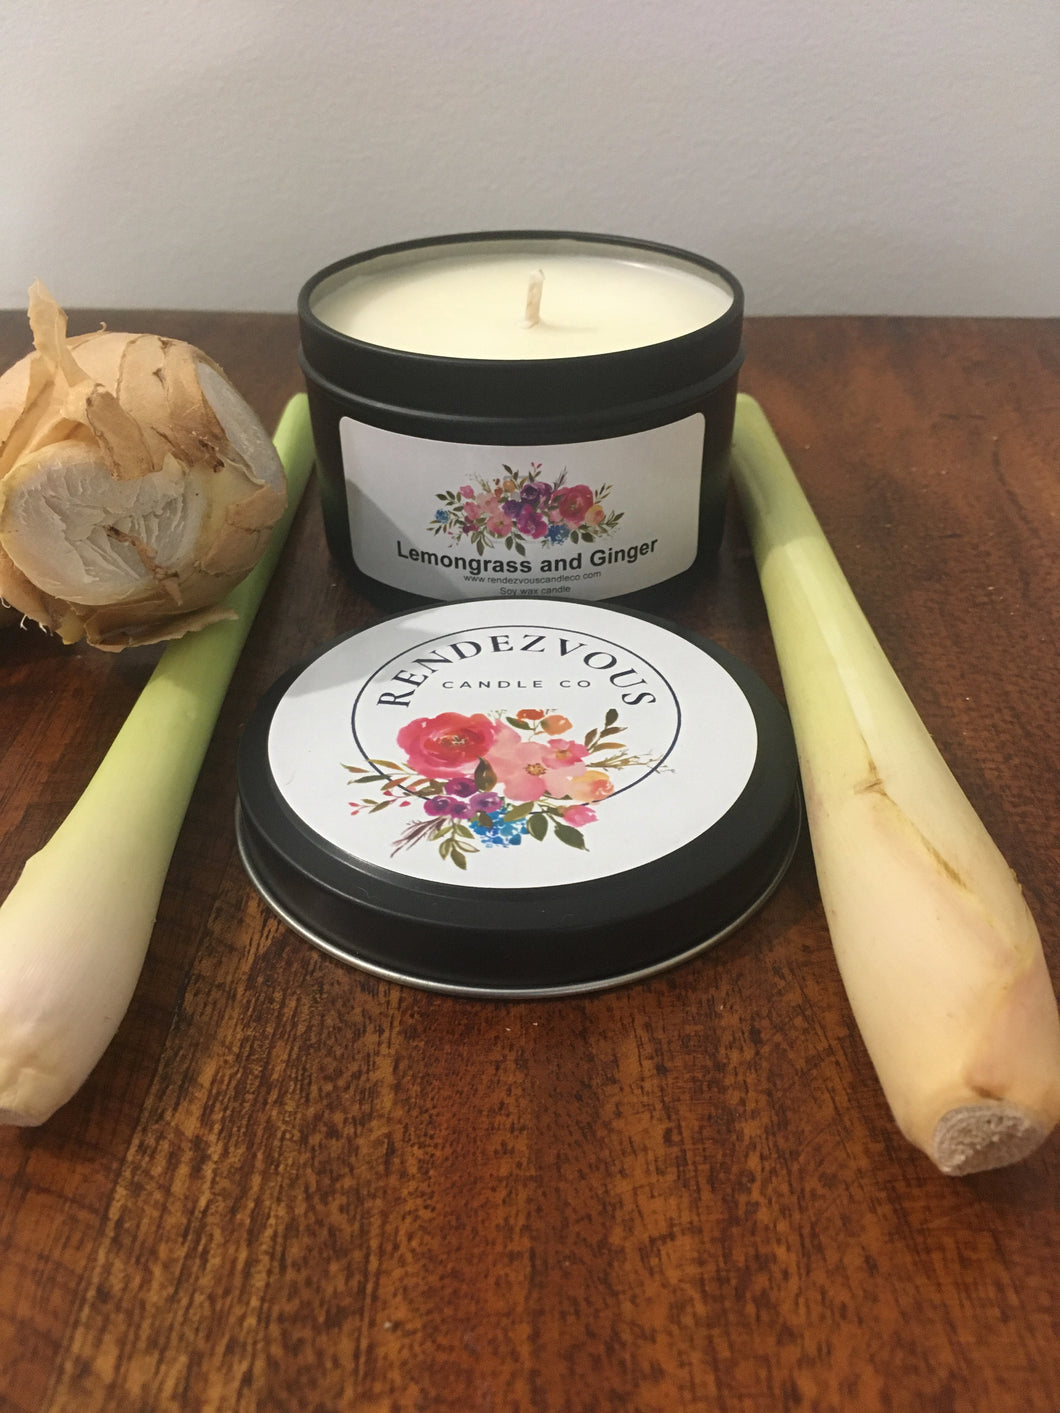 Lemongrass and Ginger Scented Soy Candle